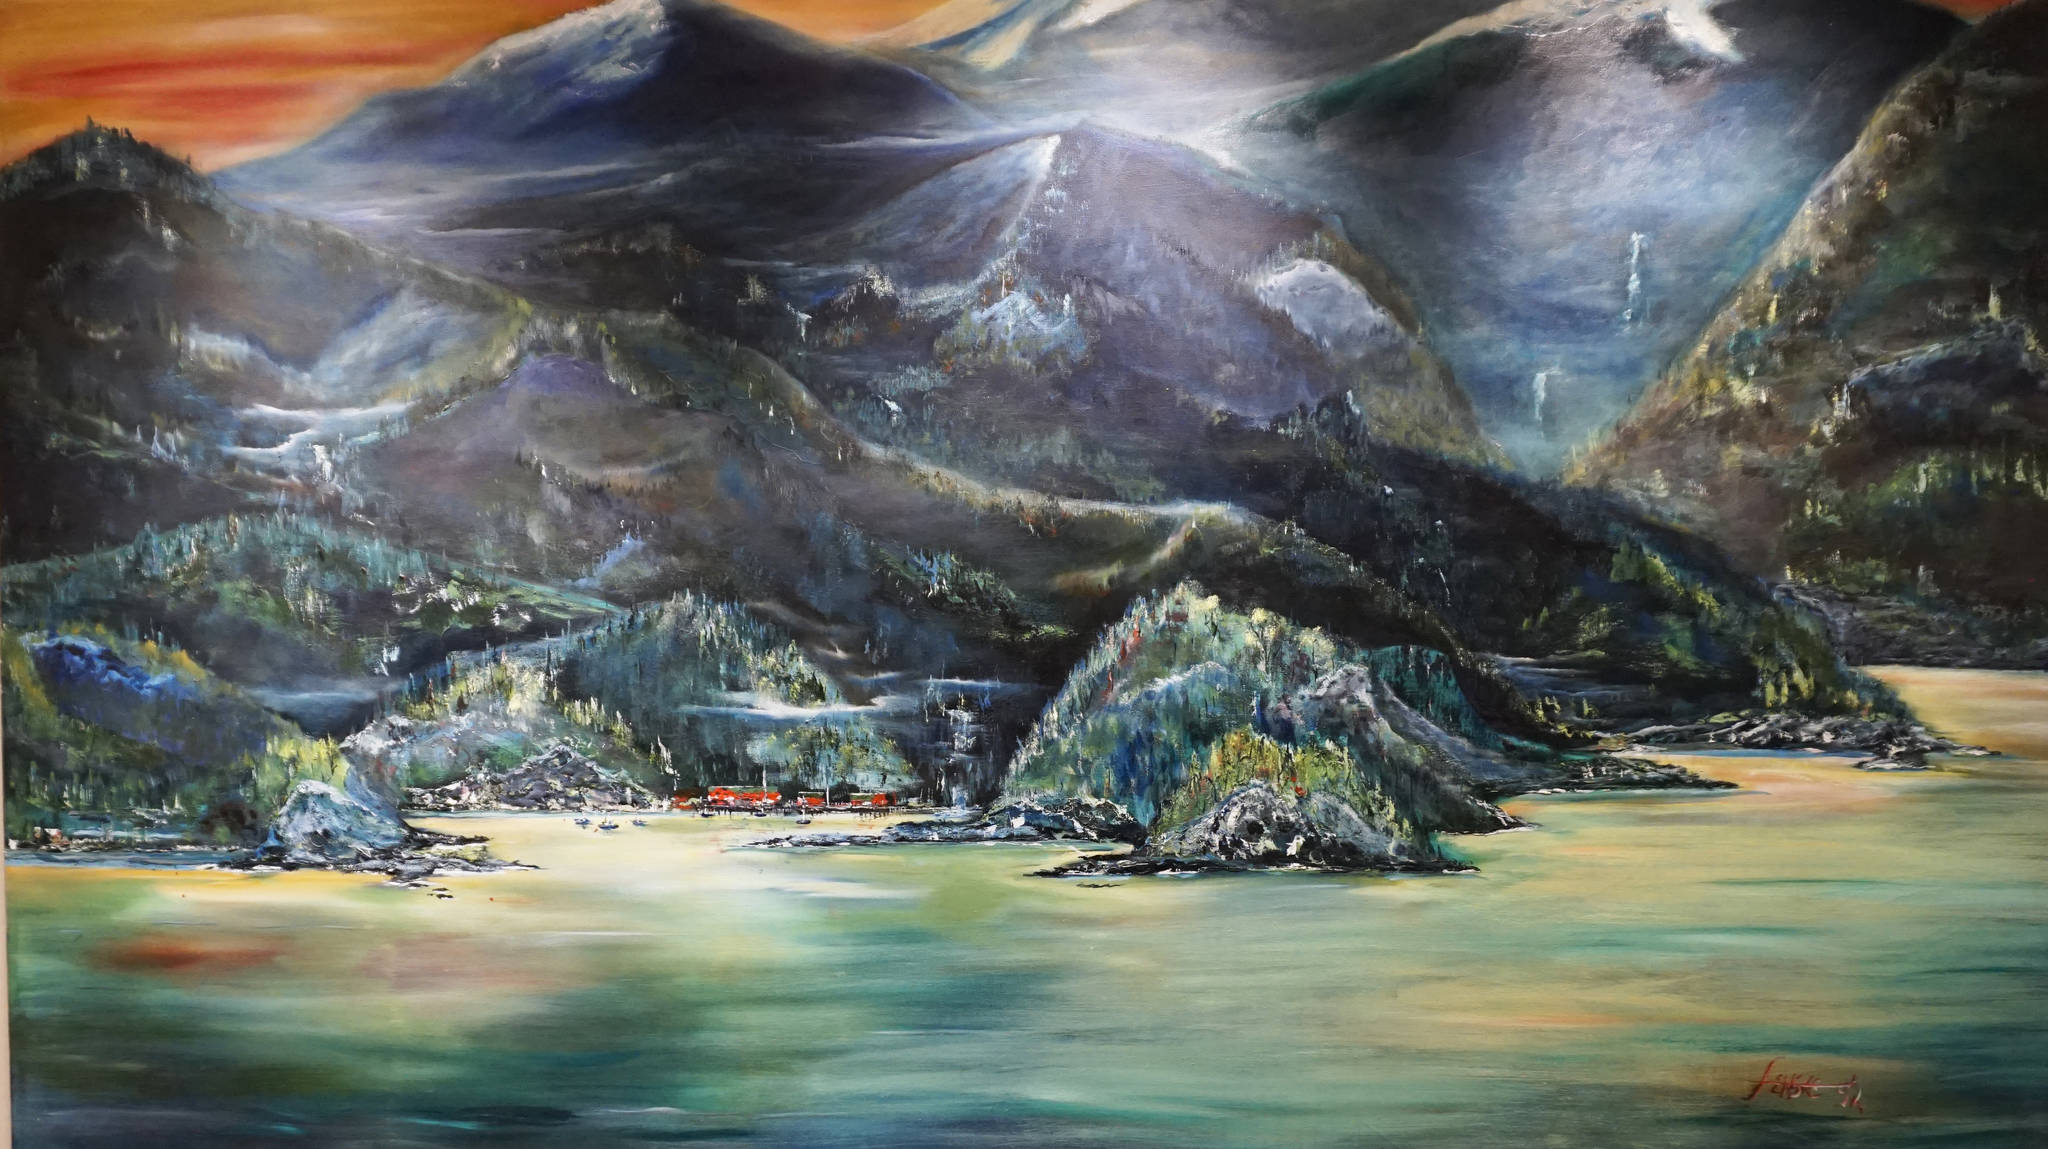 One of John Fenske’s paintings at the First Friday, April 5, 2019, opening for his retrospective showing at Kachemak Bay Campus in Homer, Alaska. (Photo by Michael Armstrong/Homer News)